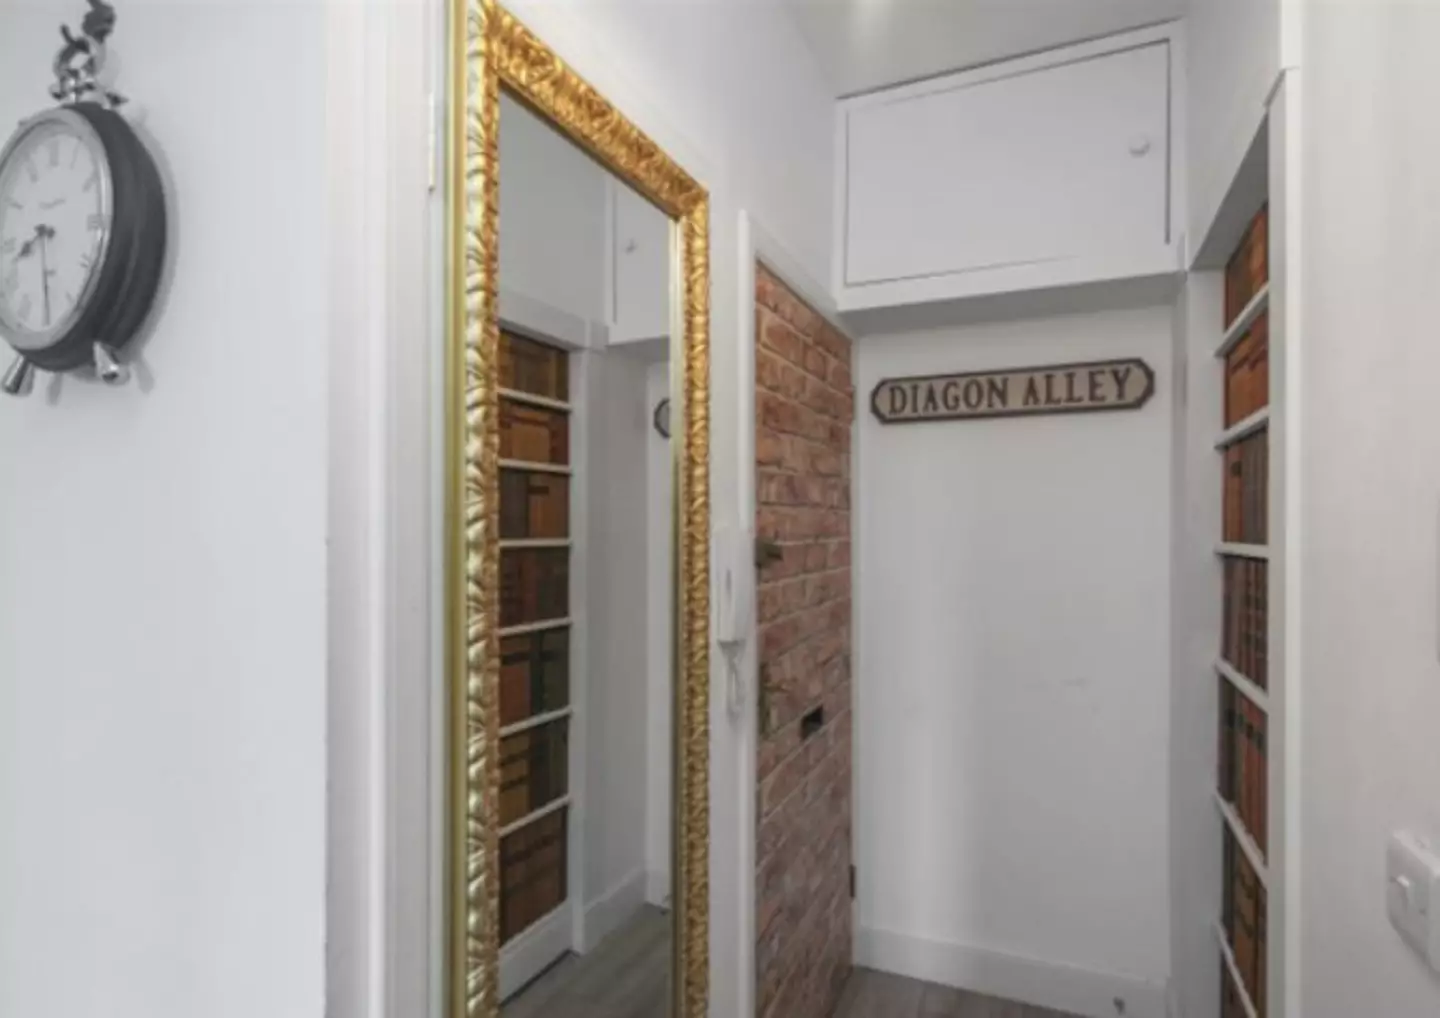 It has secret storage space disguised by a long Hogwarts-esque mirror (